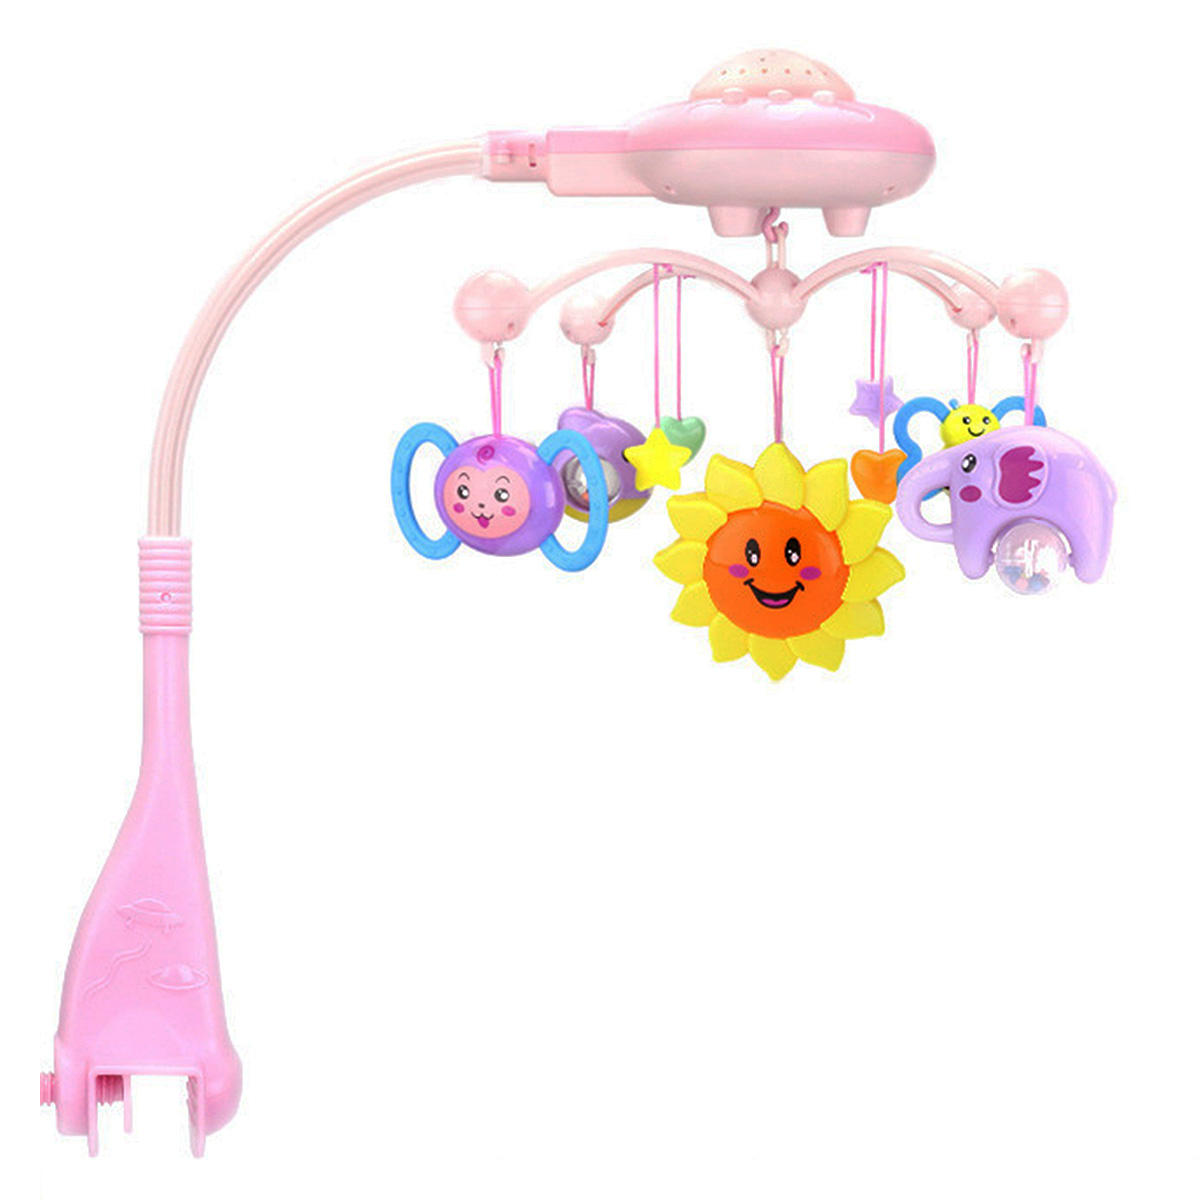 Crib-Mobile-Musical-Bed-Bell-With-Animal-Rattles-Projection-Early-Learning-Toys-0-12-Months-1434065-11